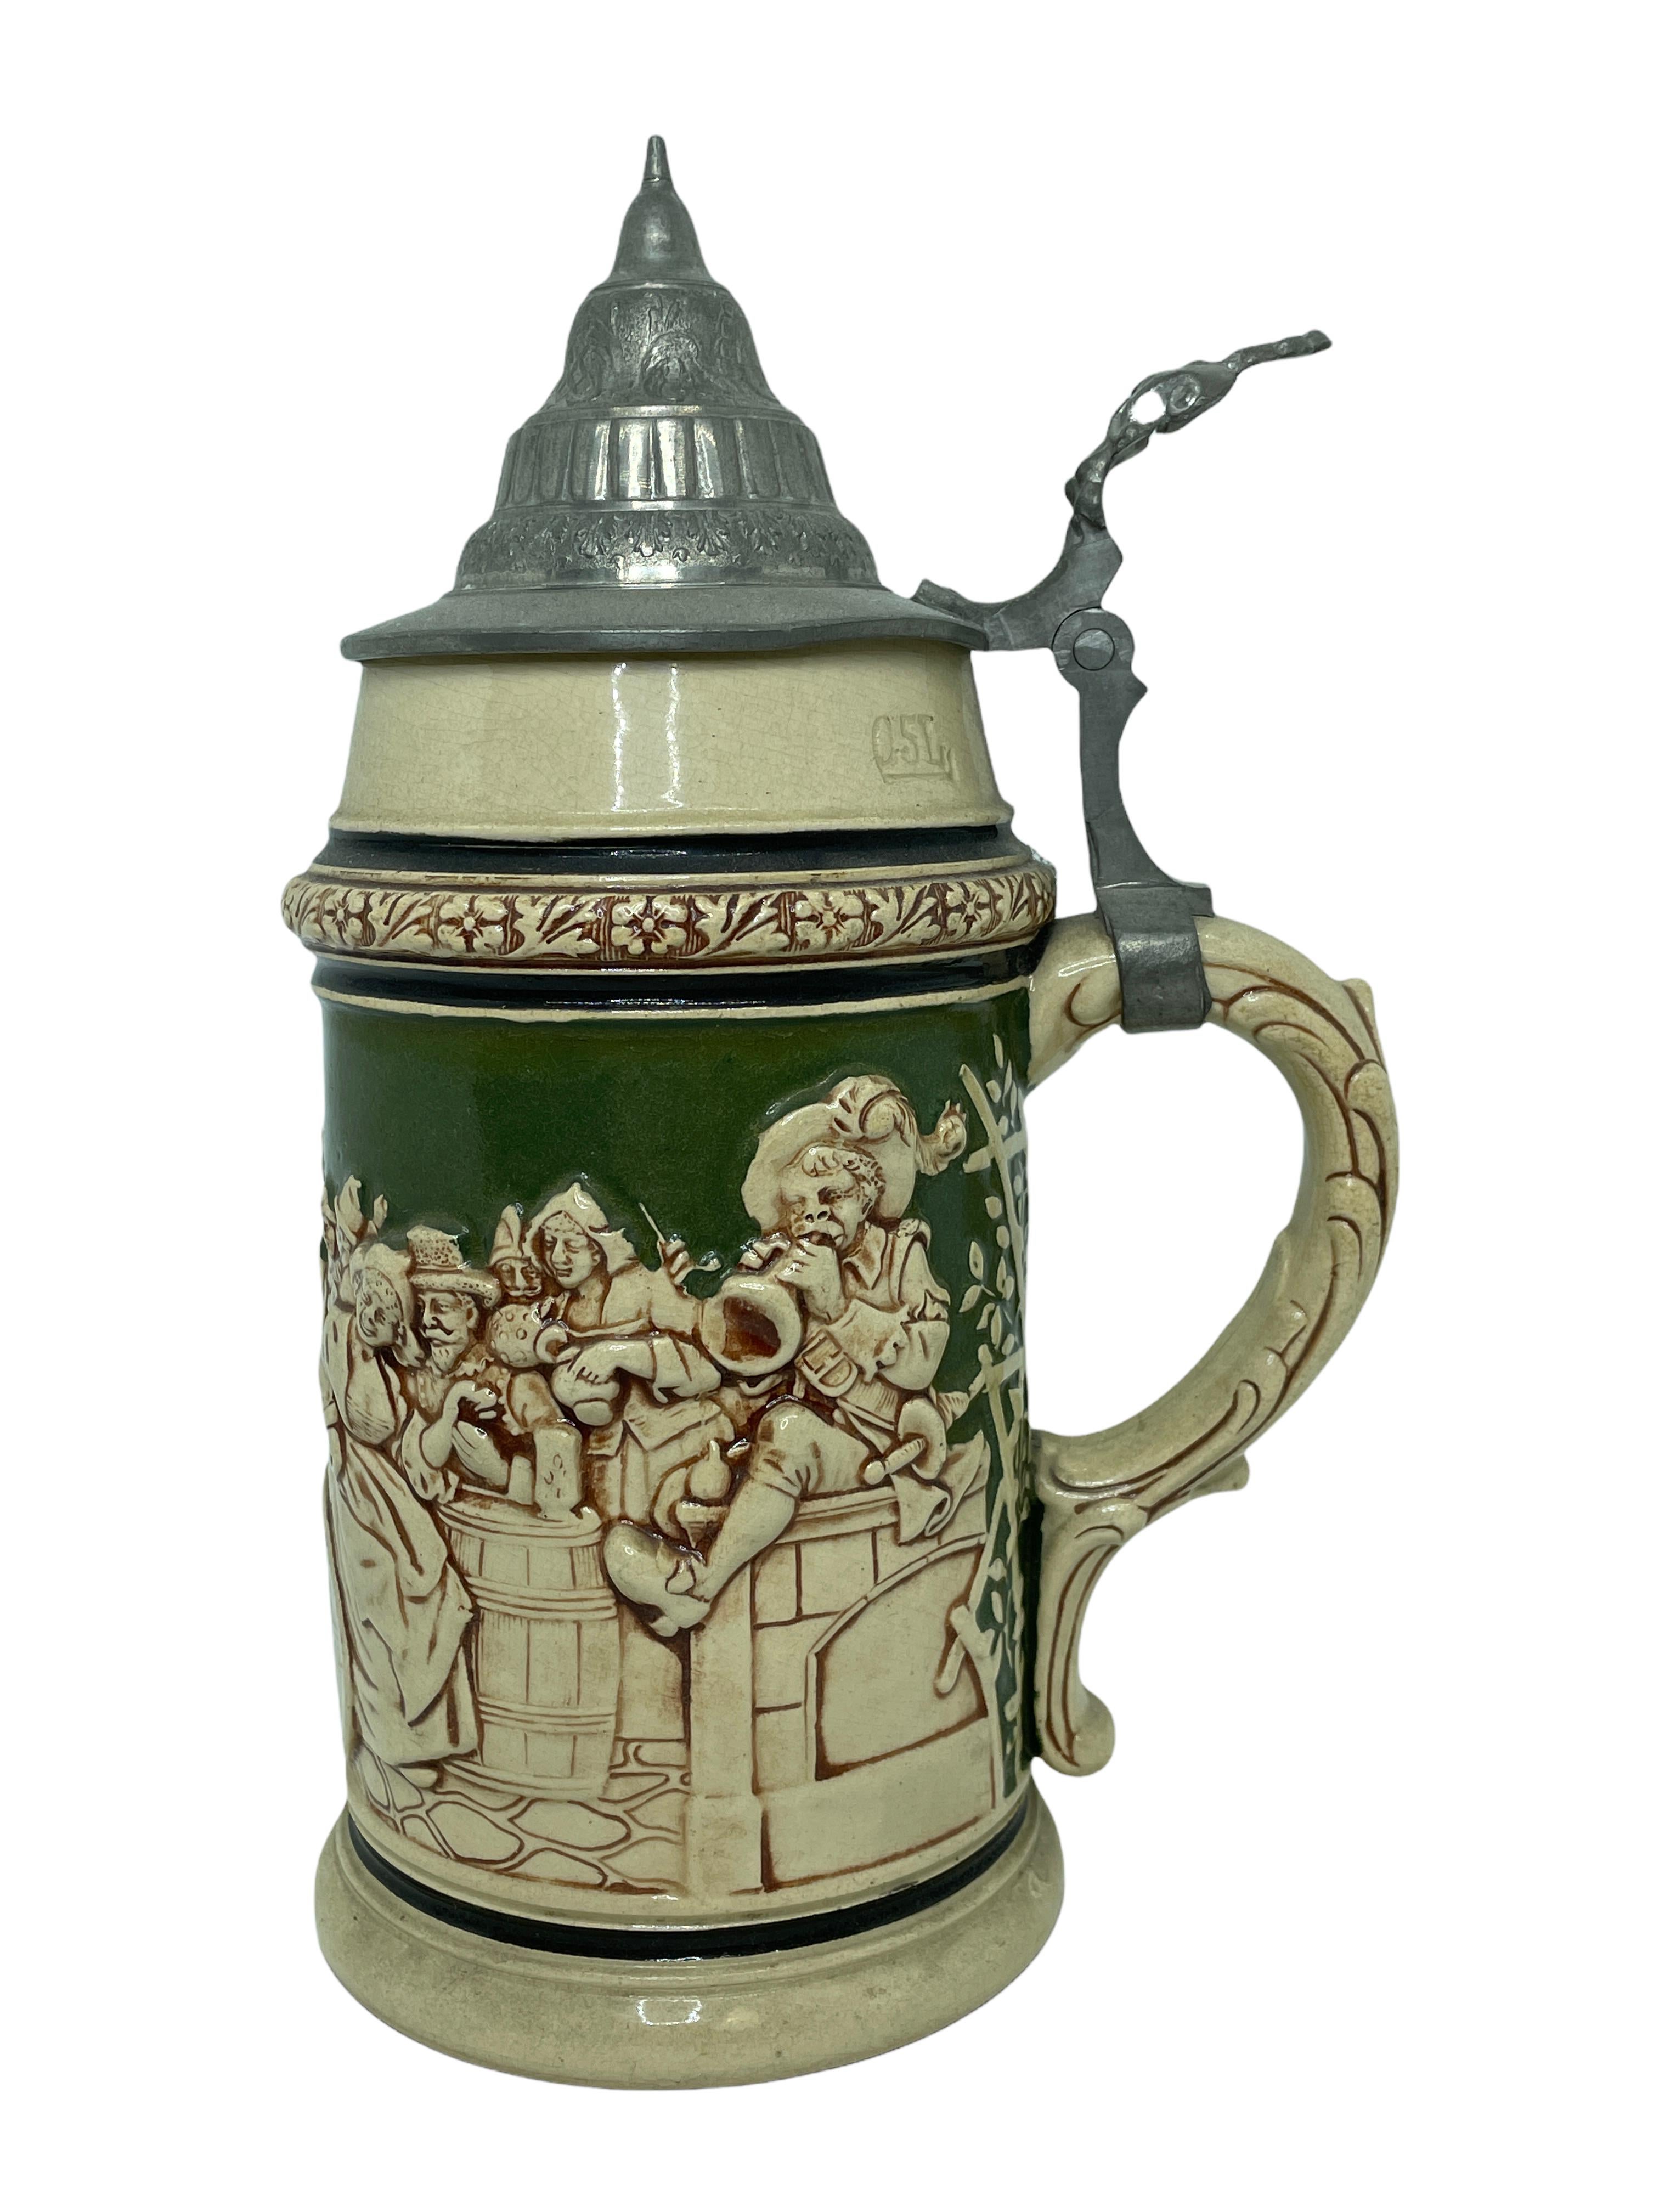 A gorgeous beer stein, made in Germany. This beer stein has been made in Germany, circa 1900s. Absolutely gorgeous piece still in great condition, without damage. Lid works properly. It is a 1/2 Liter Stein.